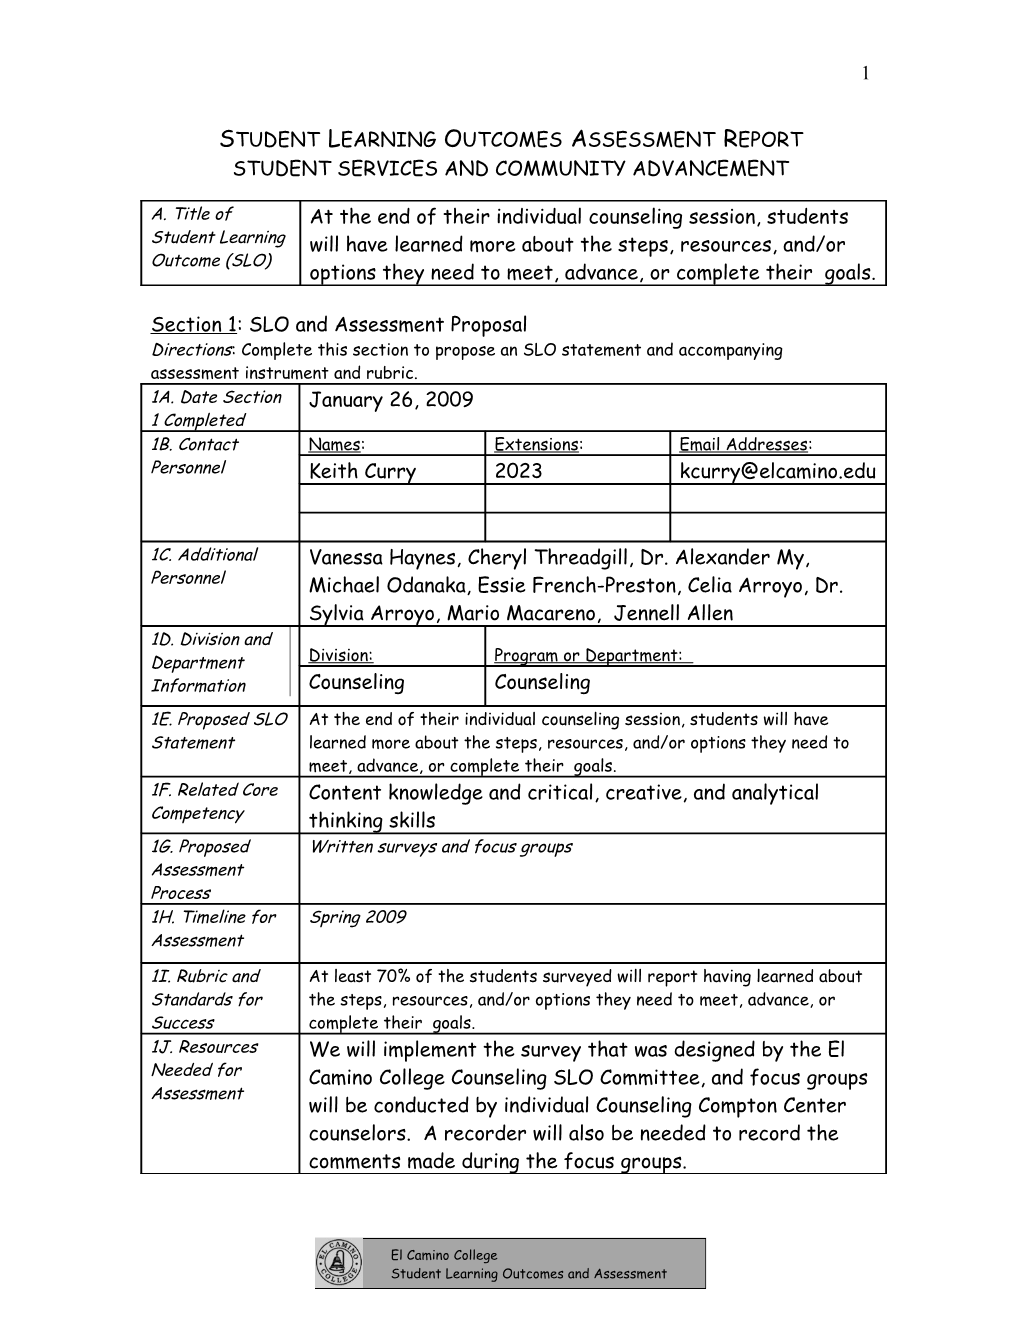 Student Learning Outcomes Assessment Report